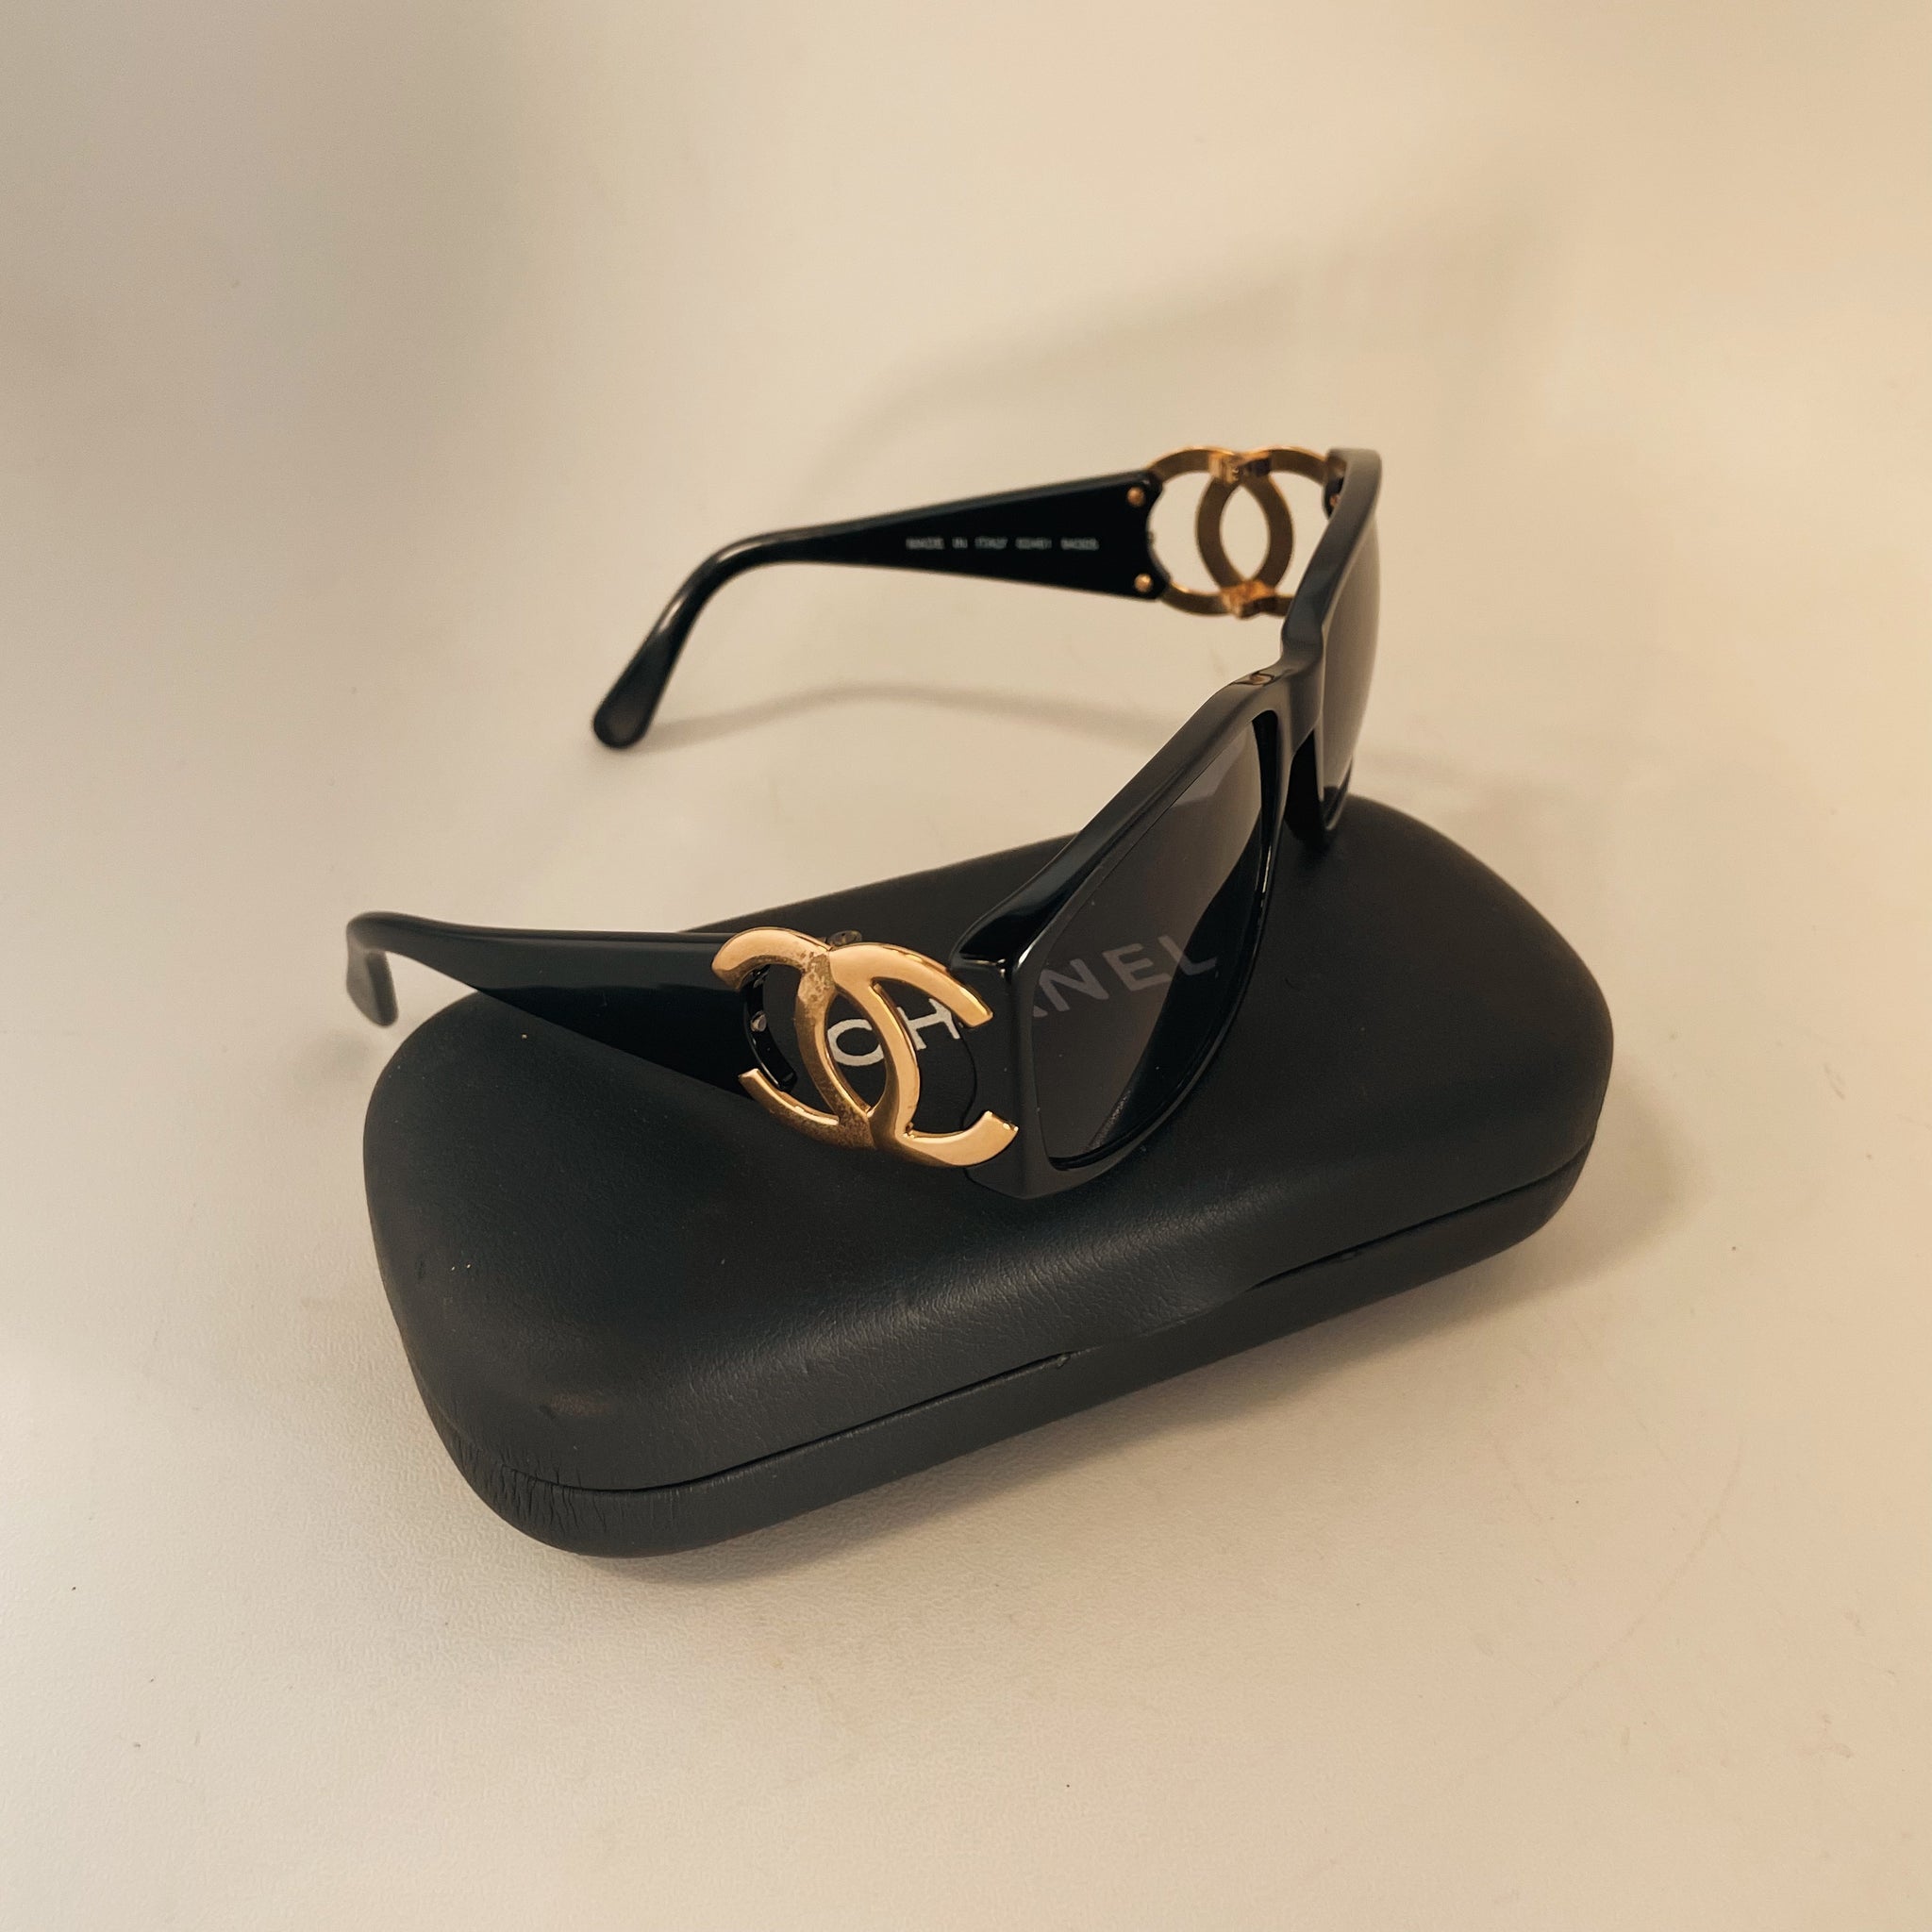 CHANEL, Accessories, Vintage Chanel Sunglasses With Chain